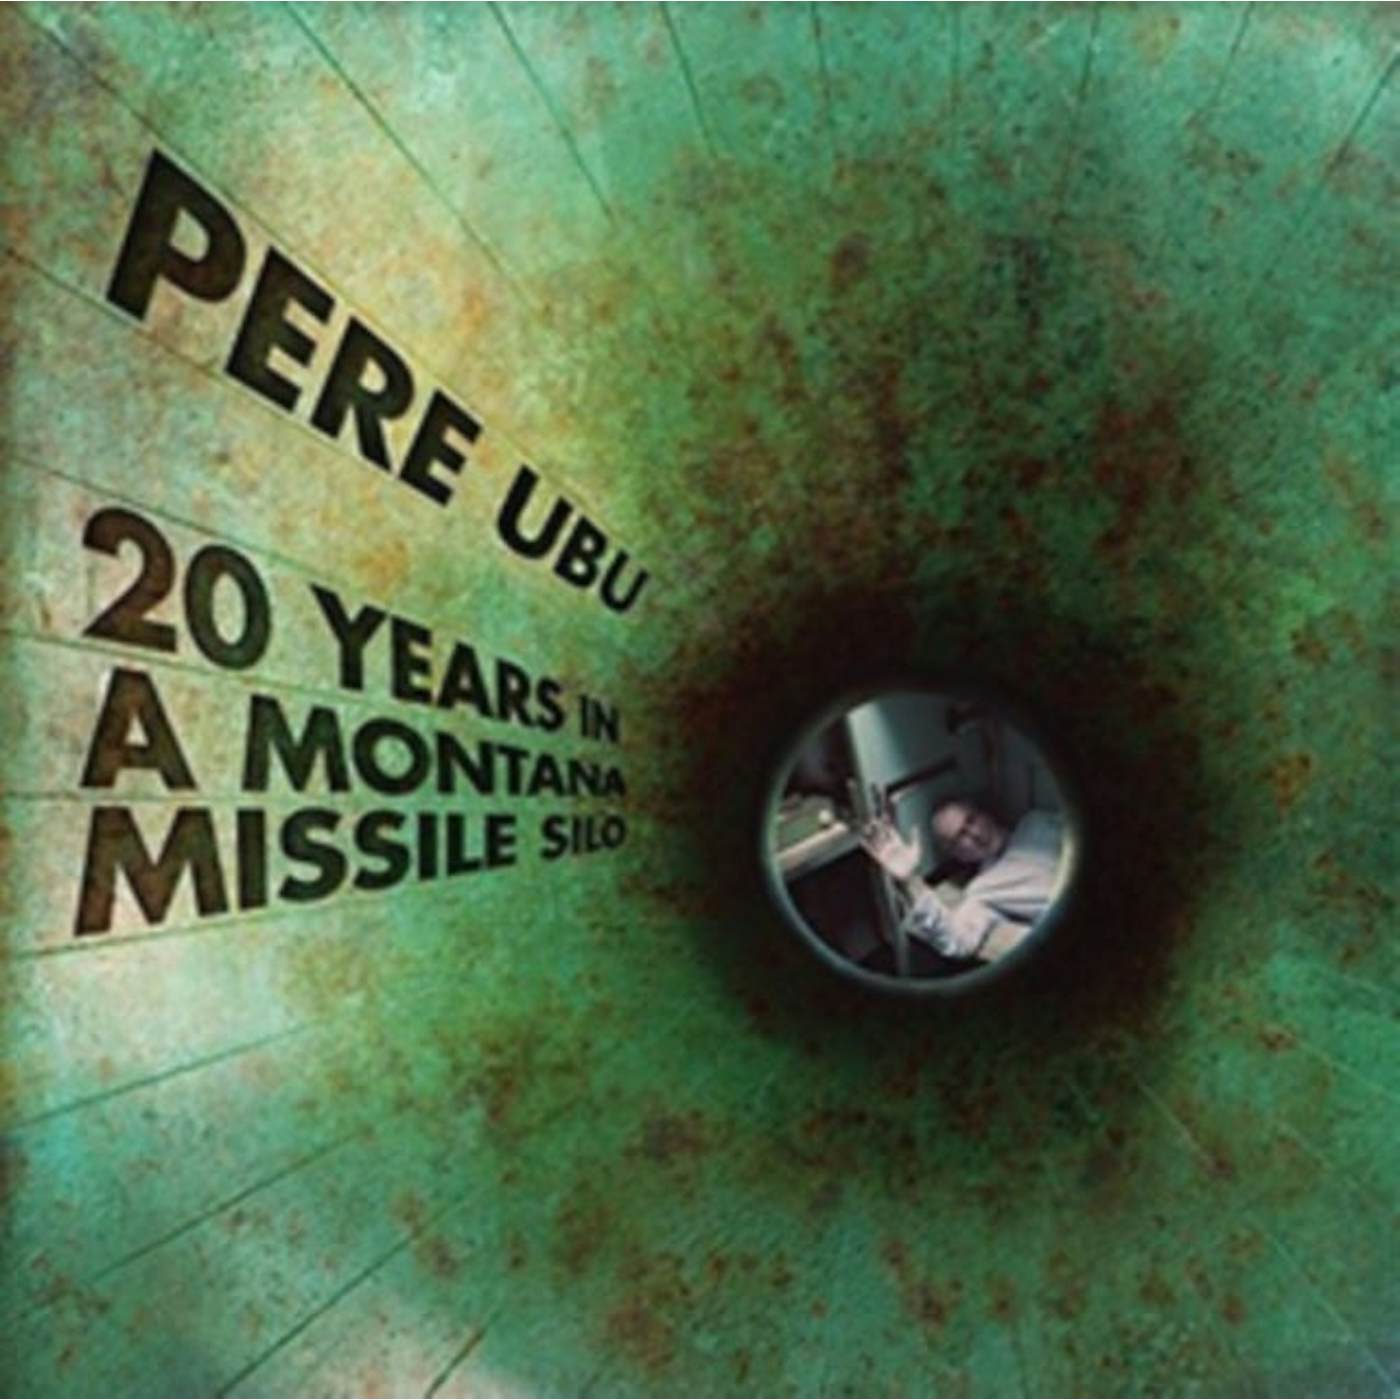 Pere Ubu LP Vinyl Record - 20.  Years In A Montana Missile Silo